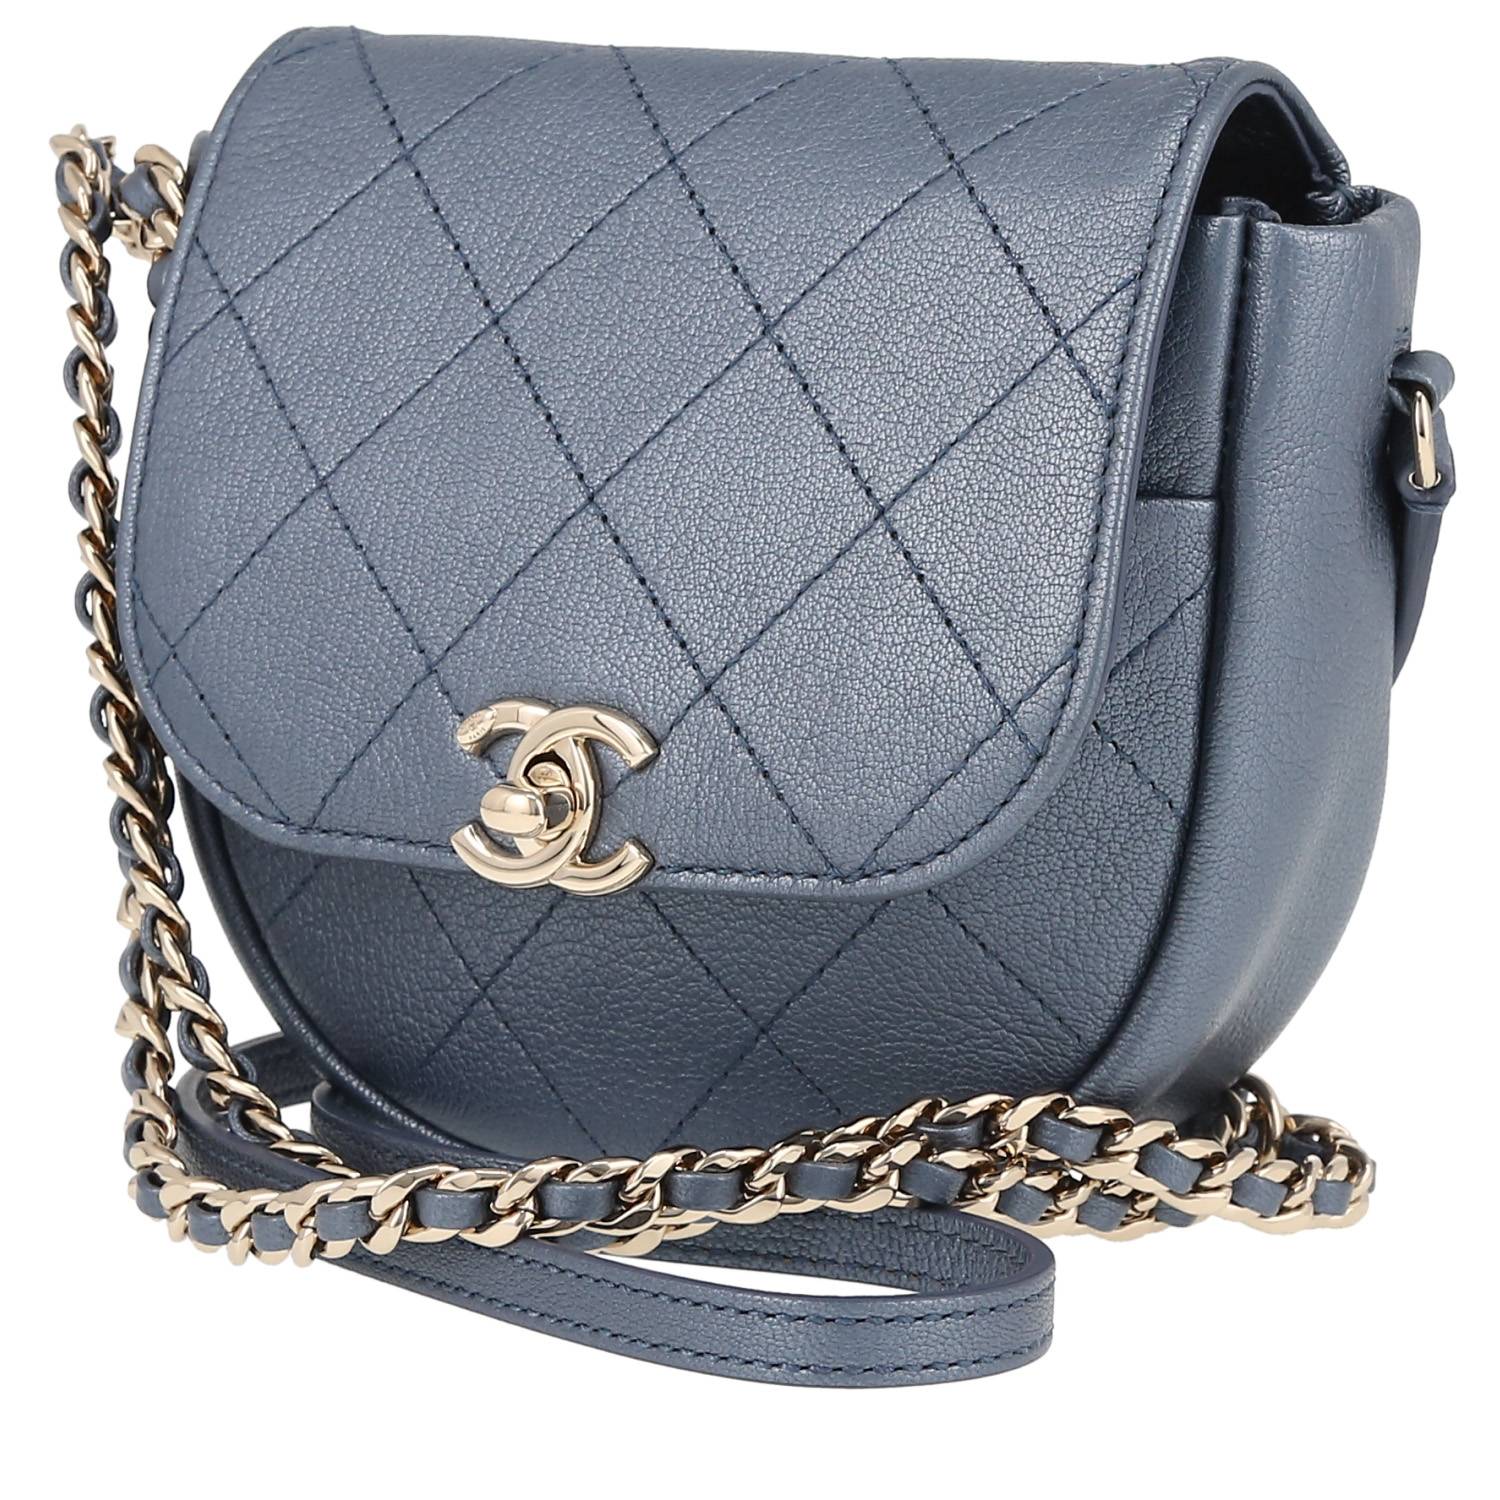 Chanel Weaved Leather Mini Bowler Bag Green And Blue with Silver